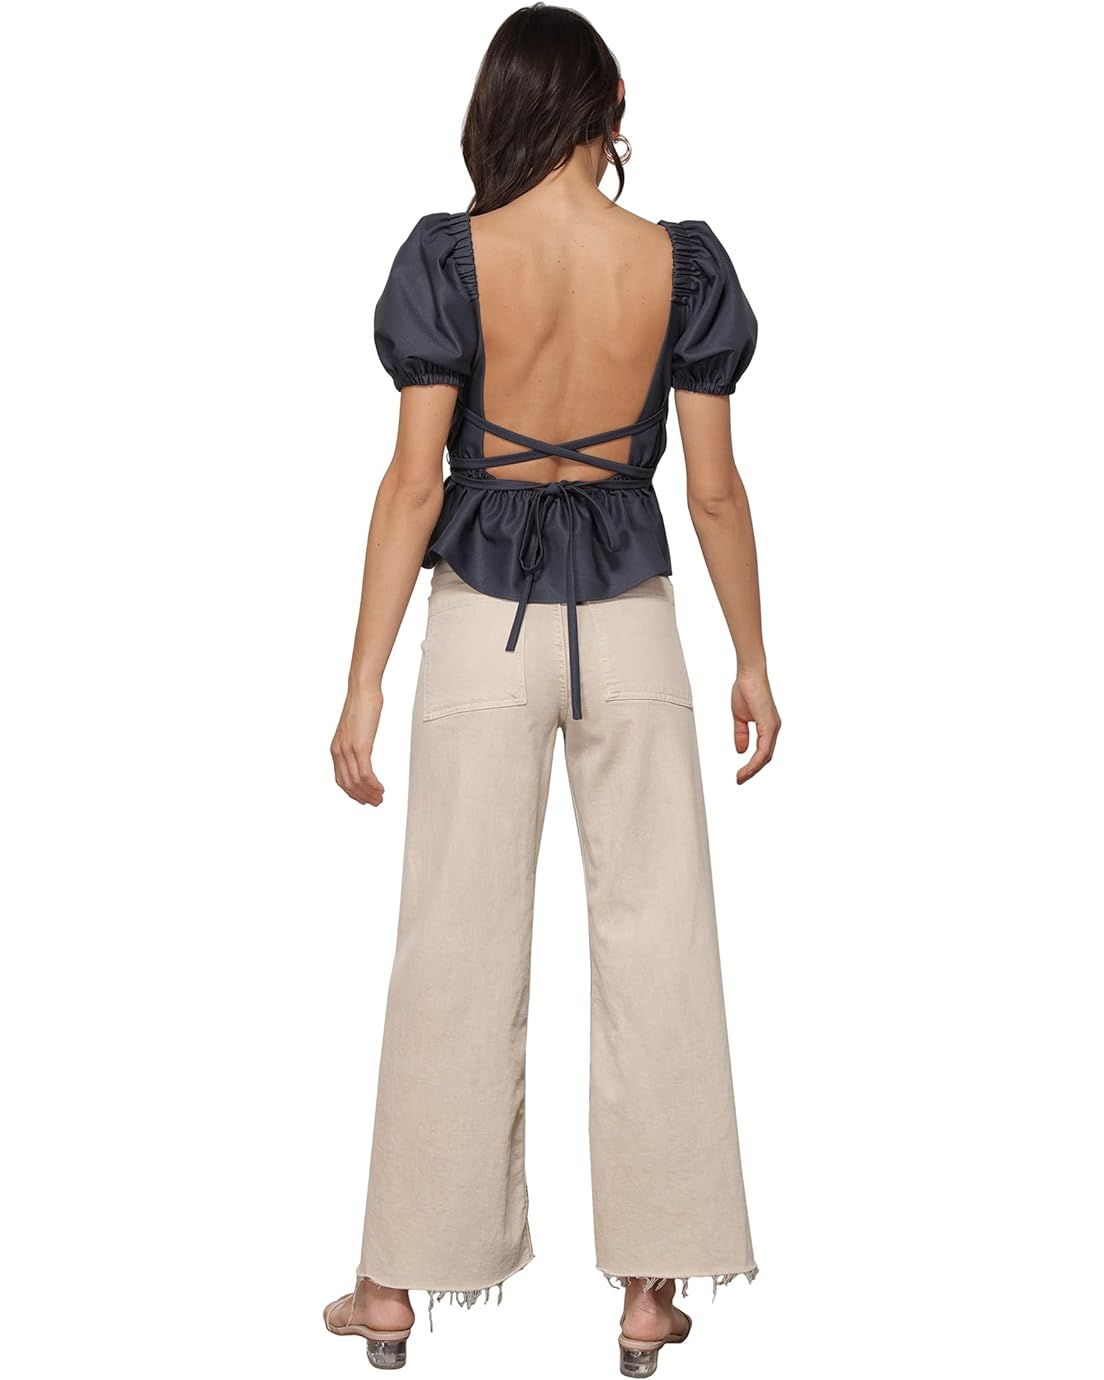 Vicky Open Back Tie Top, Fall Weekend Outfit, Fall Clothes, Fall Fashion, Fall Outfits Women | Zappos